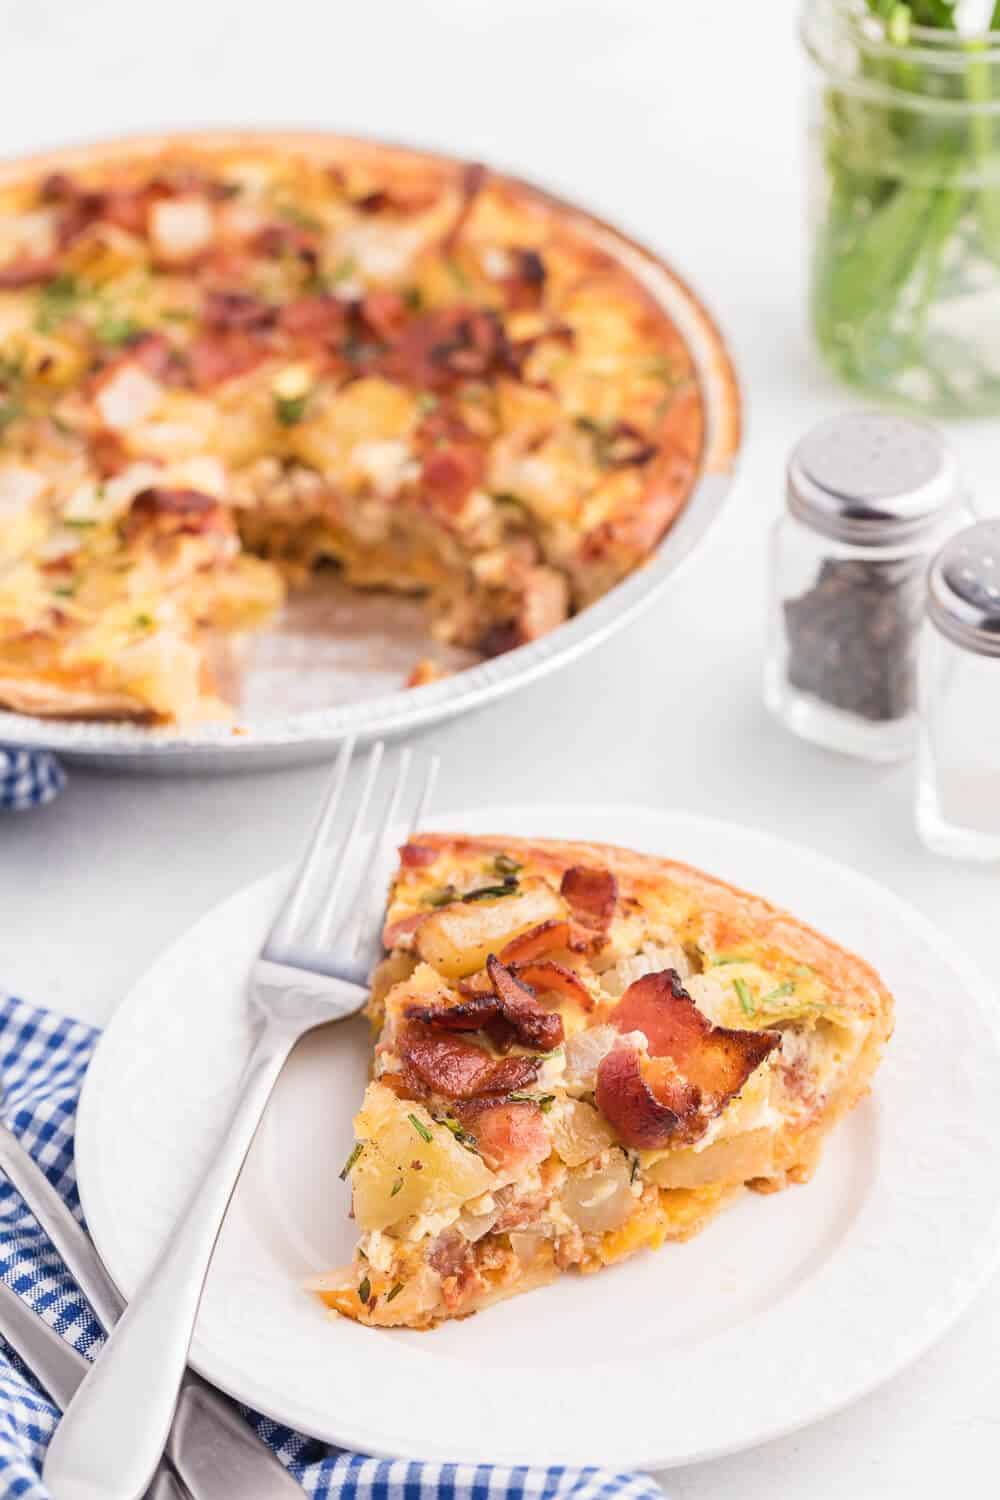 Bacon and Potato Quiche - Perfect for a St. Patrick's day brunch! A creamy, cheesy filling packed with hearty potatoes, bacon and fresh herbs.